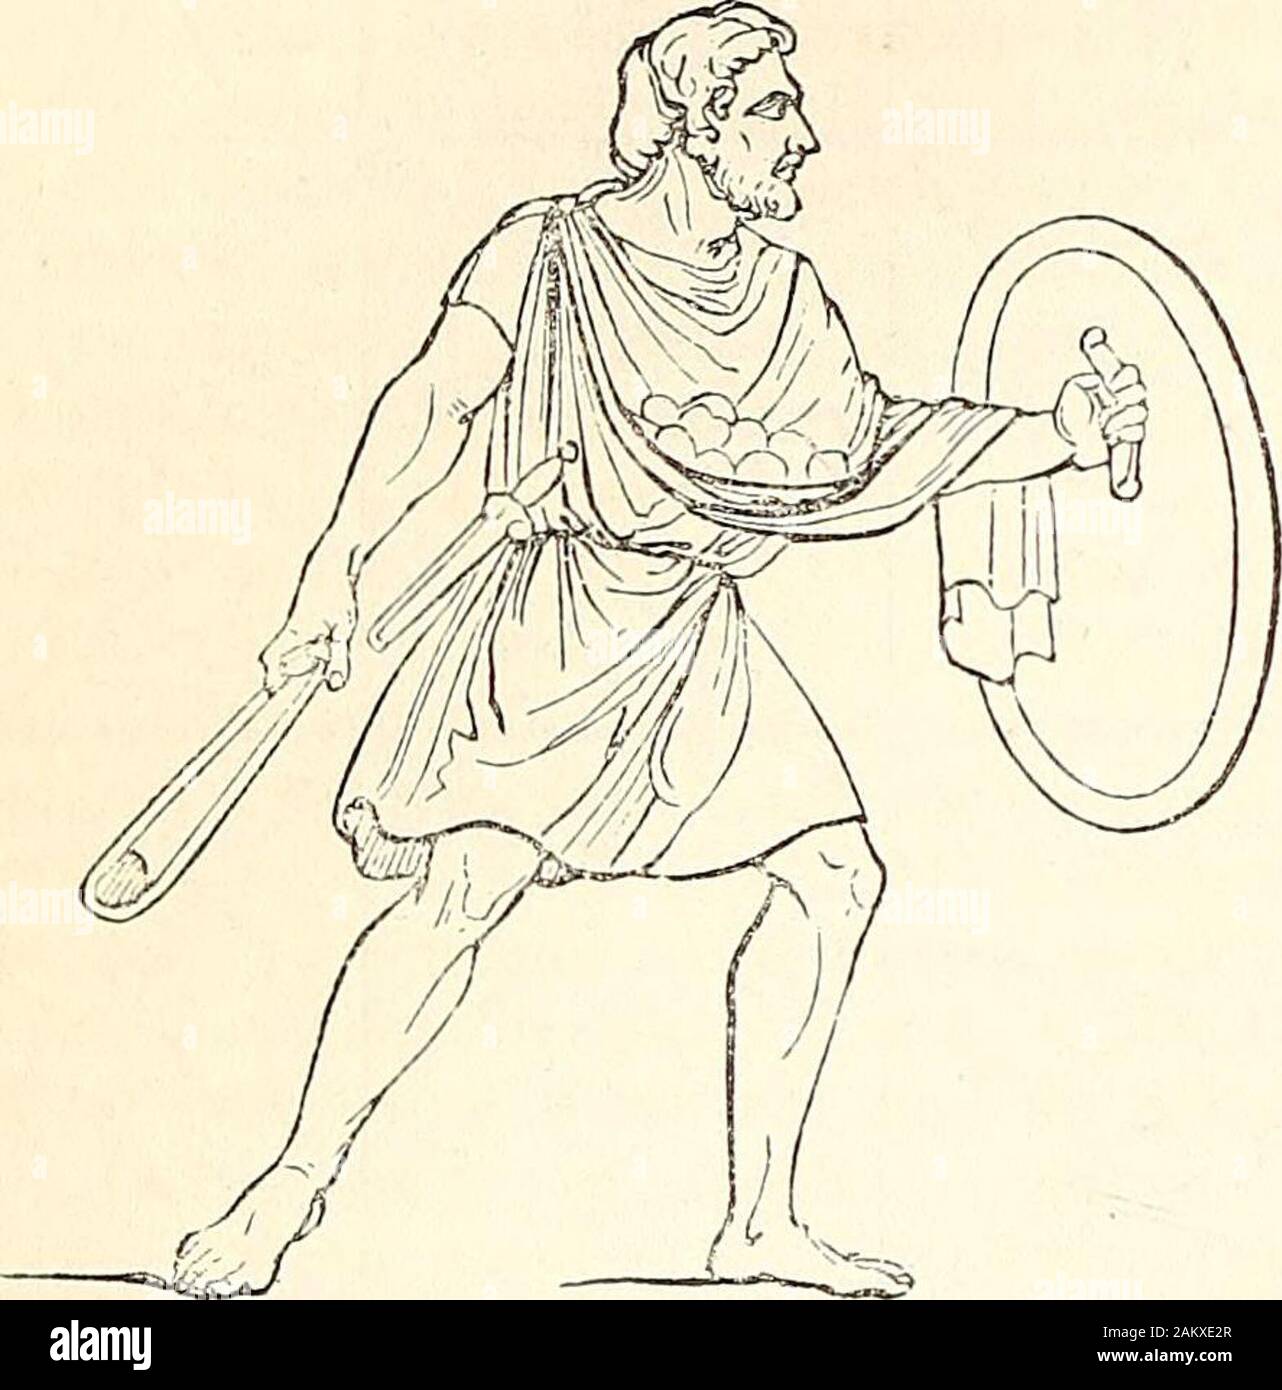 A dictionary of Greek and Roman antiquities.. . readof slingers in these wars. Among the Greeks theAcarnanians in early times attained to the greatestexpertness in the use of this weapon (Thuc. ii. 81);and at a later time the Achaeans, especially the in-habitants of Agium, Patrae, and Dymae, were cele-brated as expert slingers. The slings of these Achae-ans were made of three thongs of leather, and not ofone only, like those of other nations. (Liv. xxxviii.29.) The people, however, who enjoyed the greatestcelebrity as slingers were the natives of the Balearicislands. Their skill in the use of Stock Photo